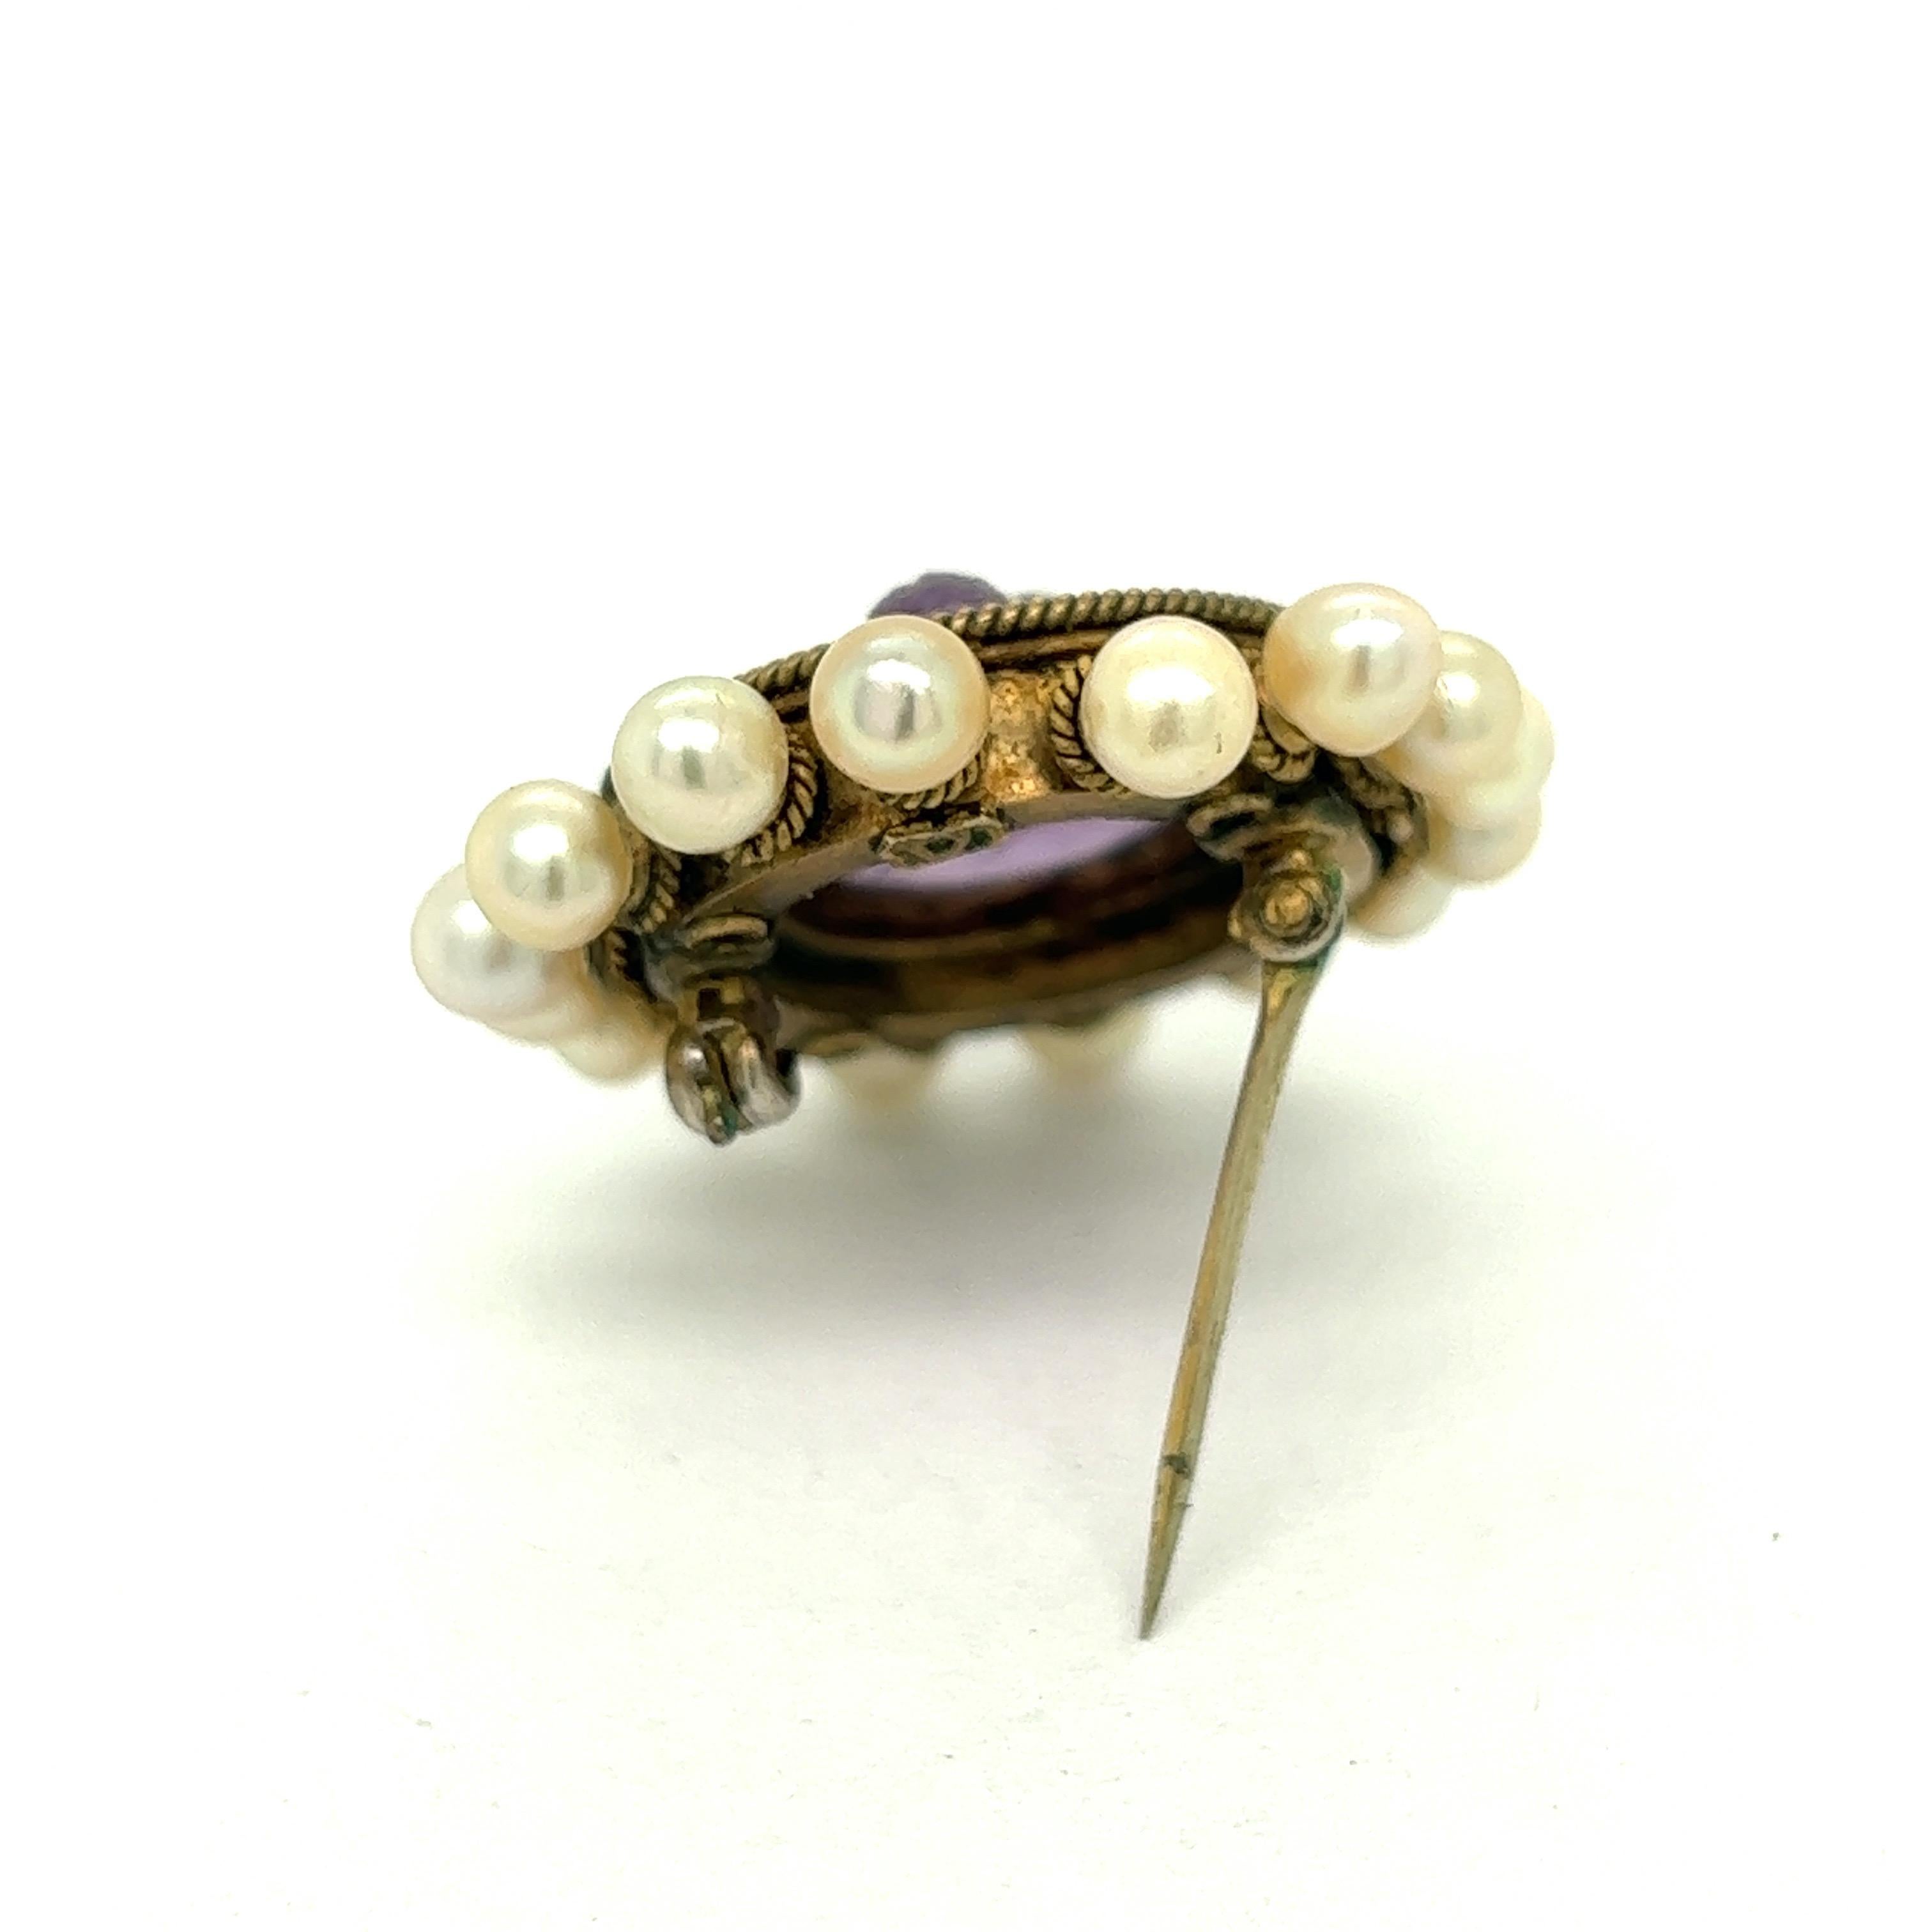 Castellani Amethyst Cameo Pearl Oval 18k Gold Brooch For Sale 2